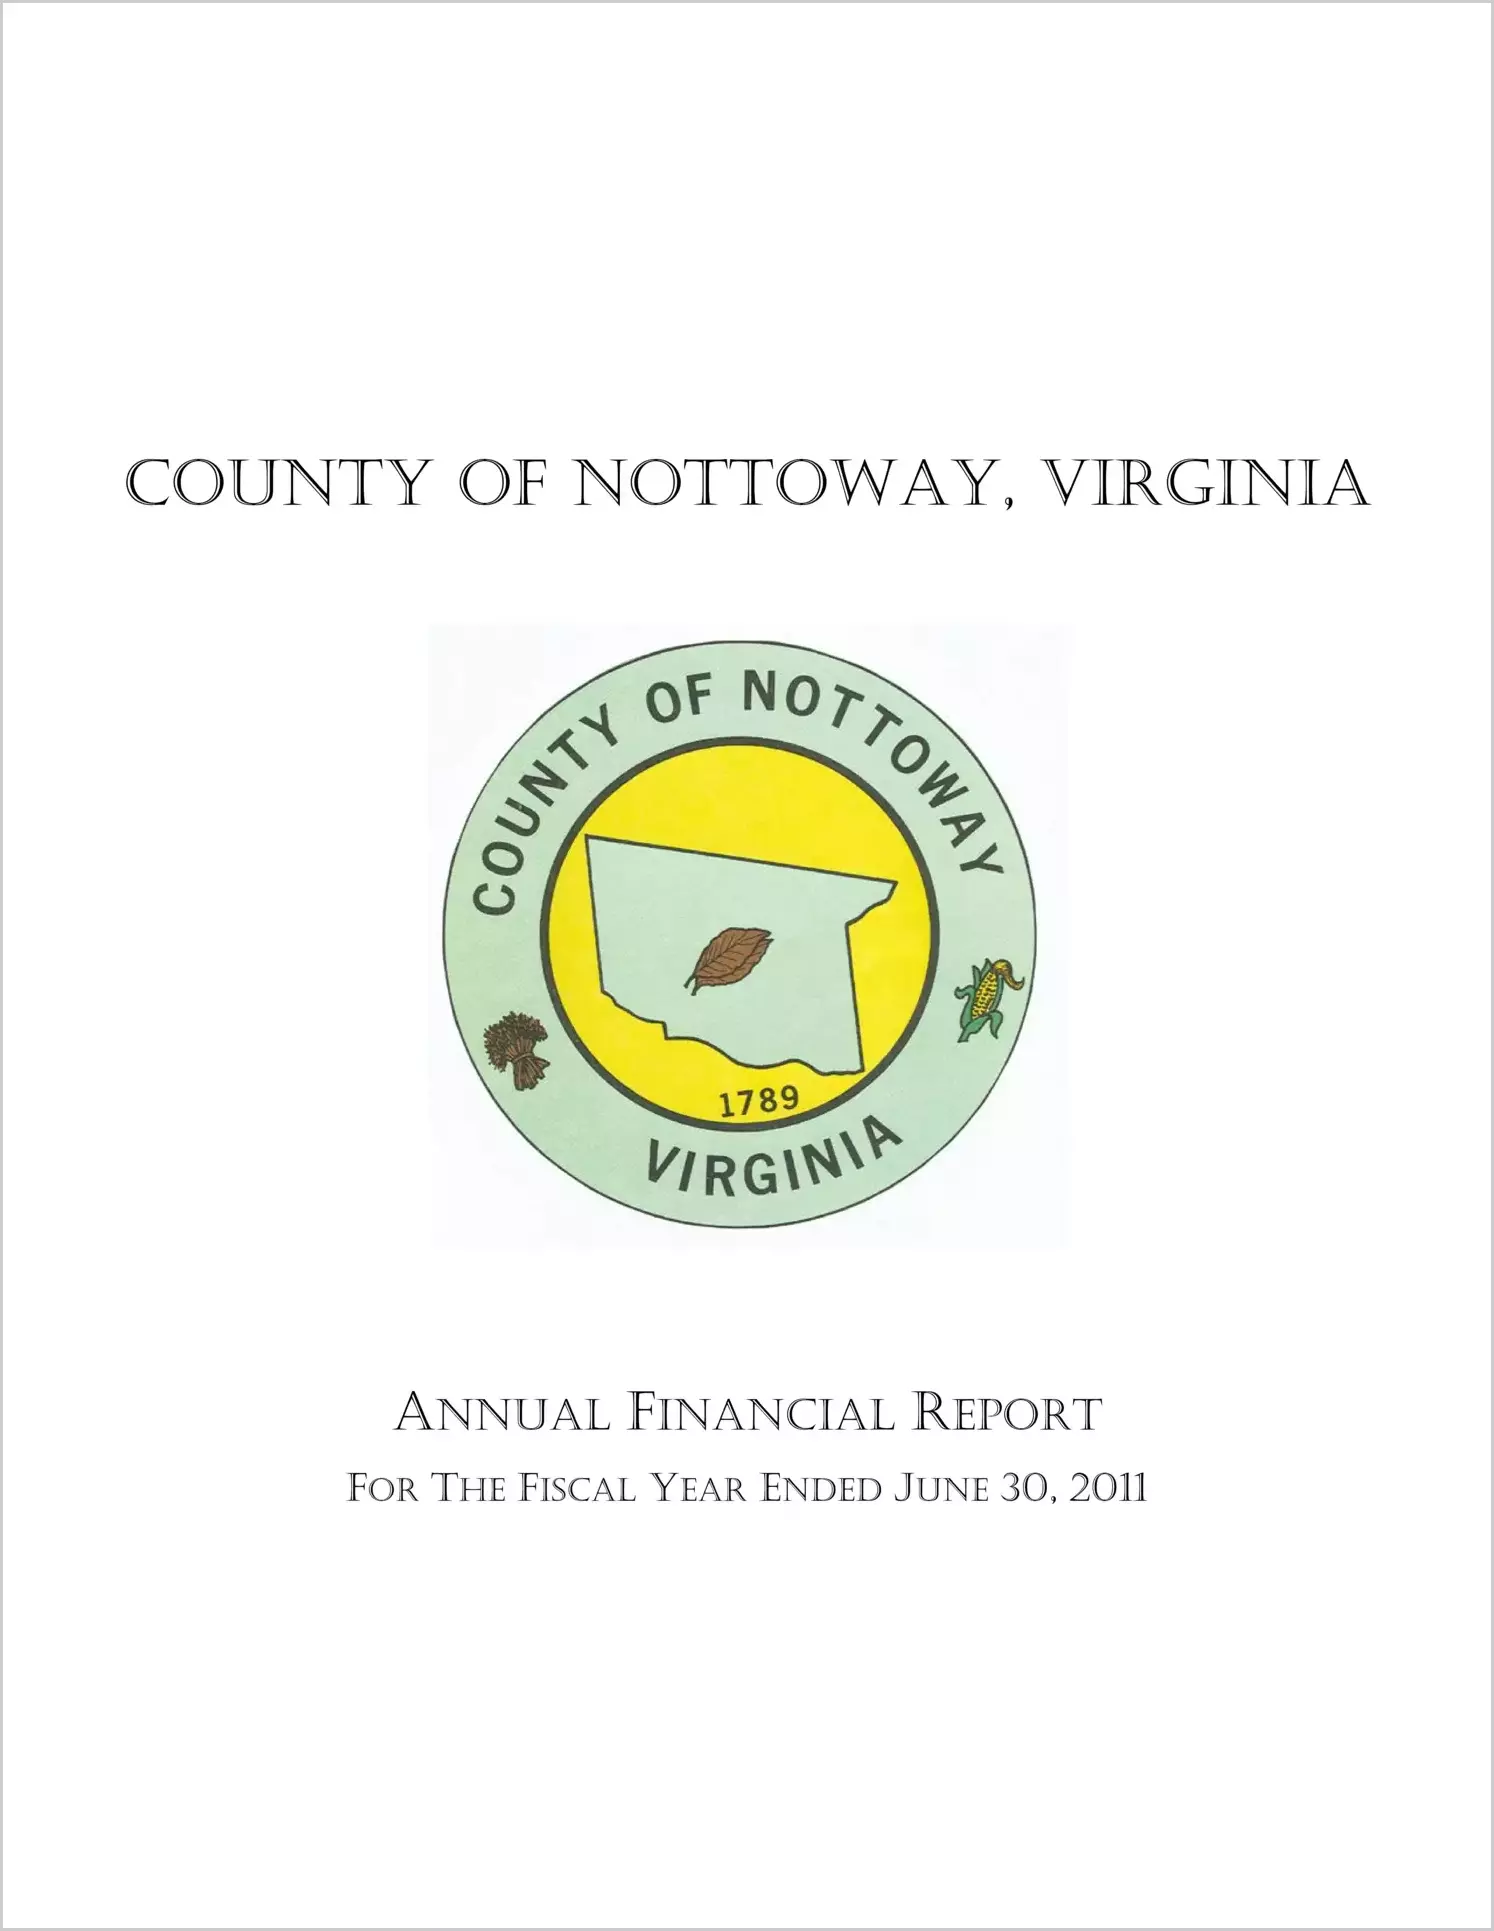 2011 Annual Financial Report for County of Nottoway